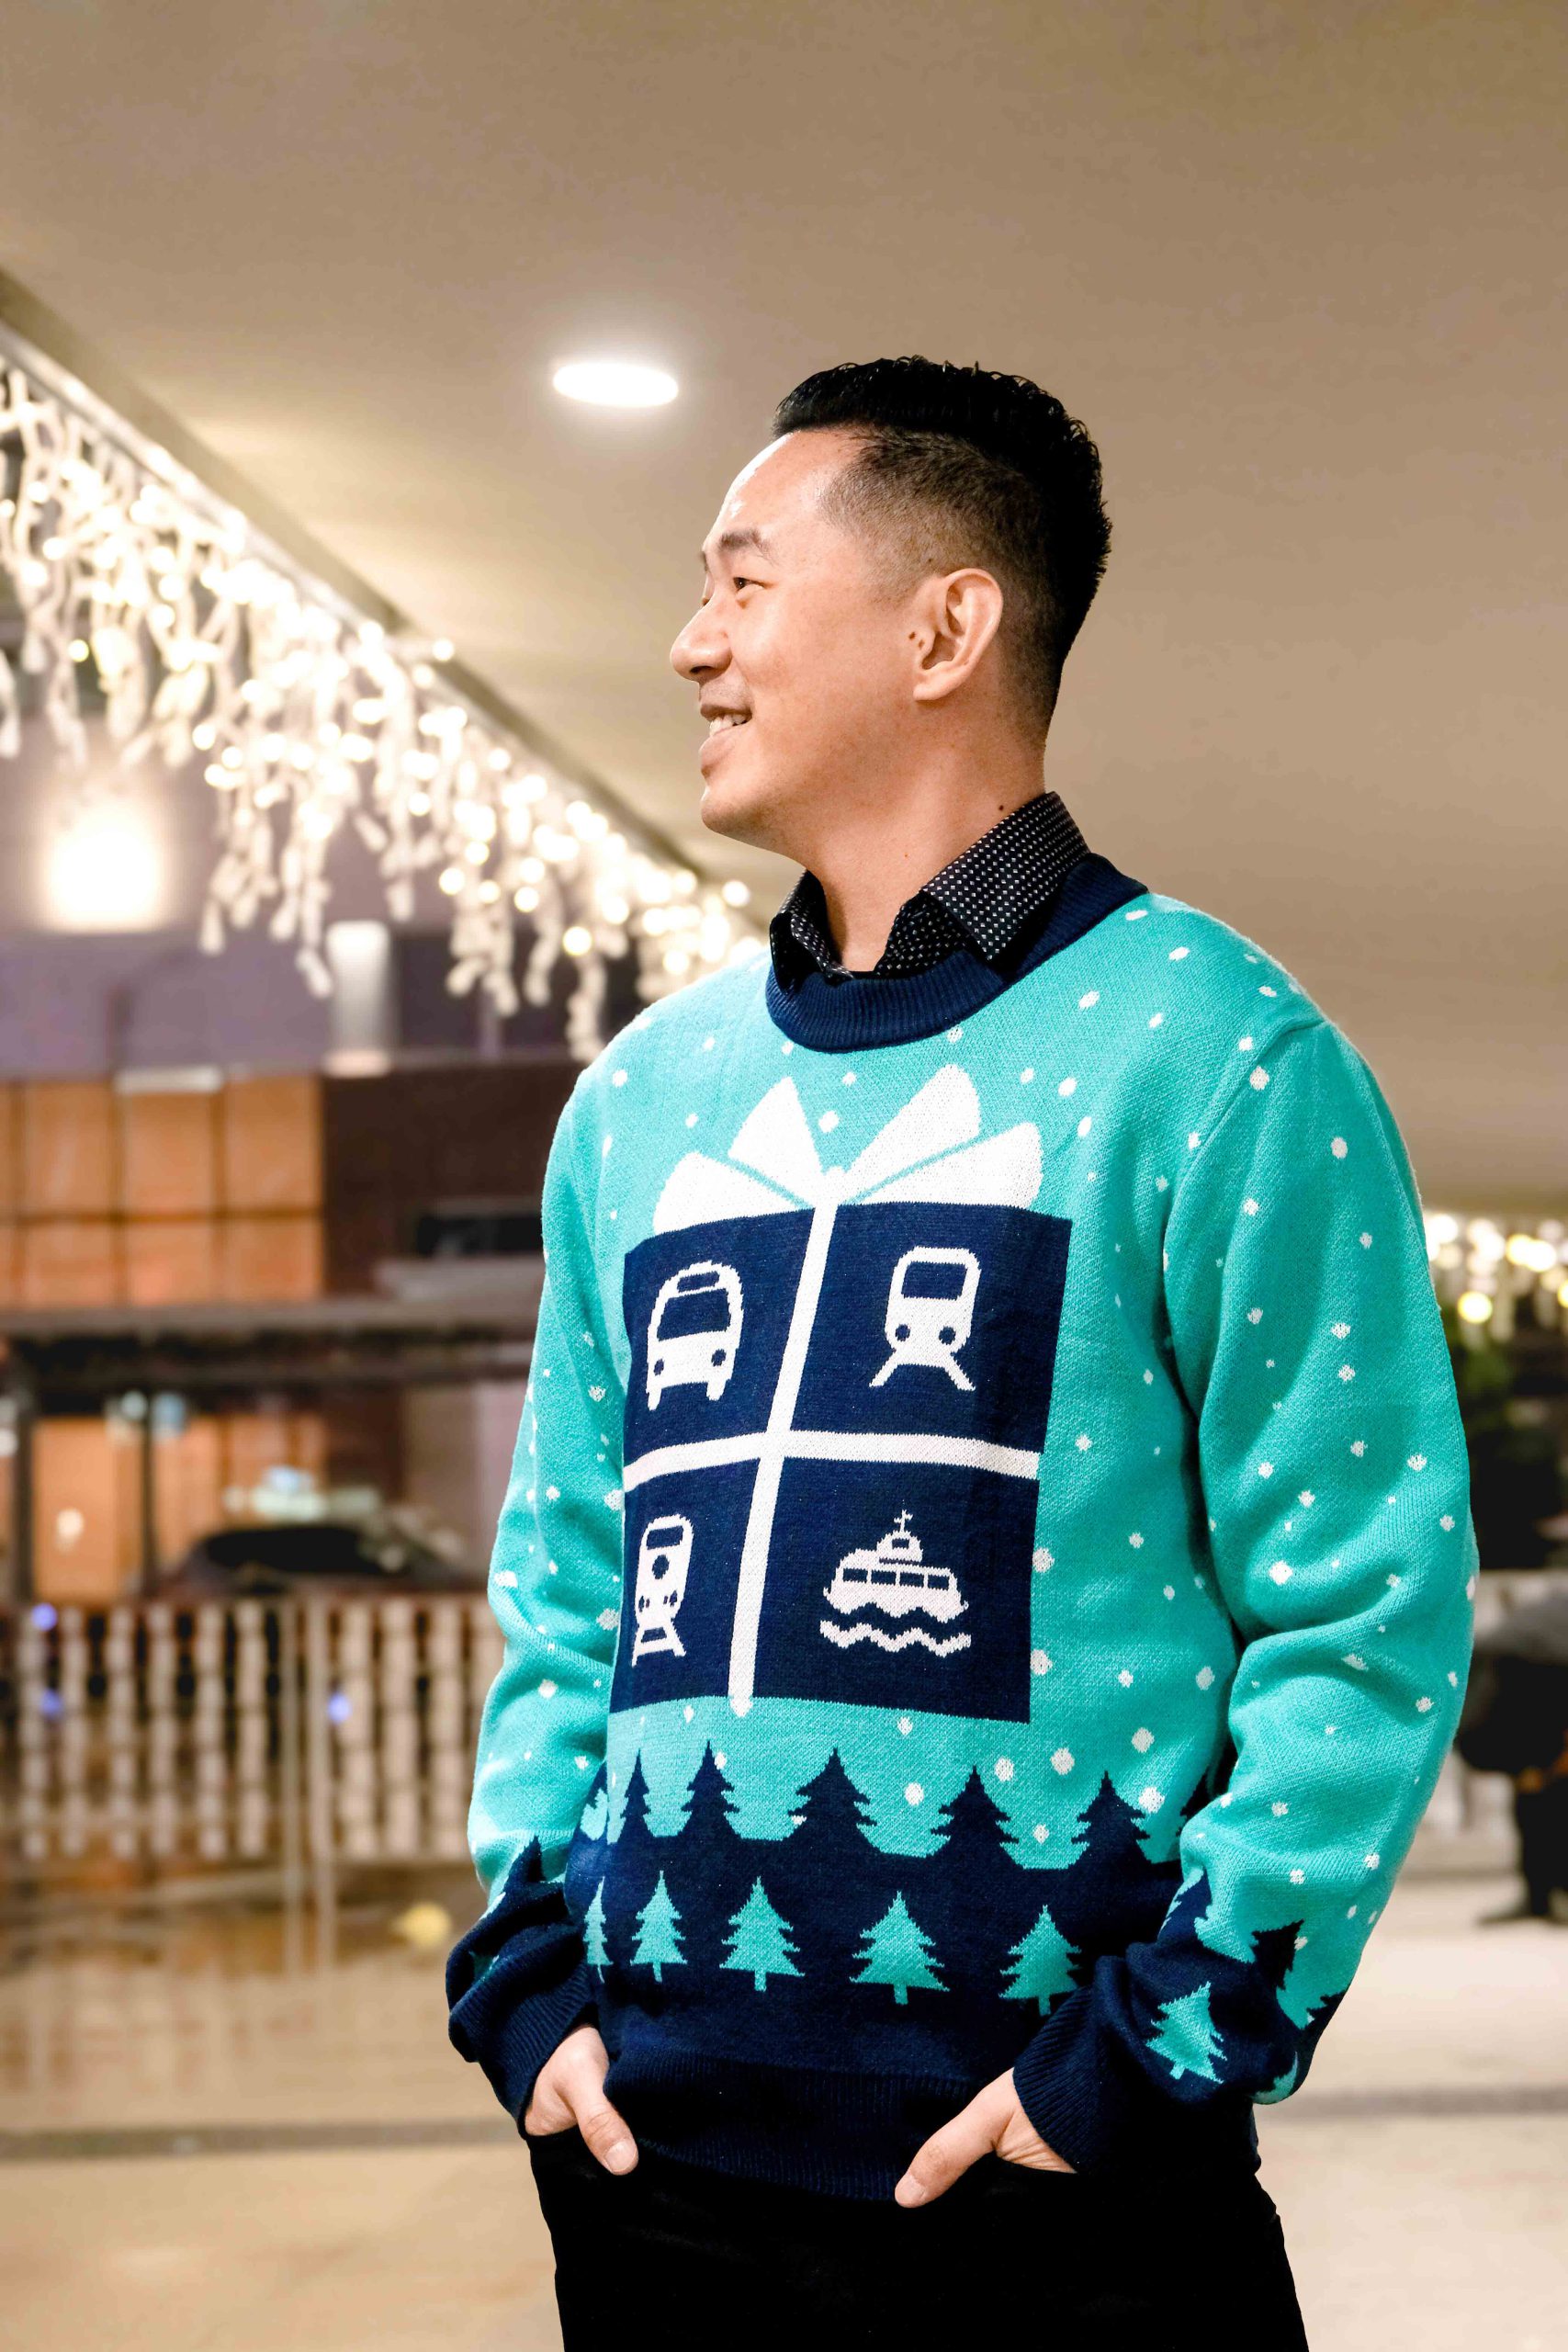 Man wearing the TransLink Holiday Sweater